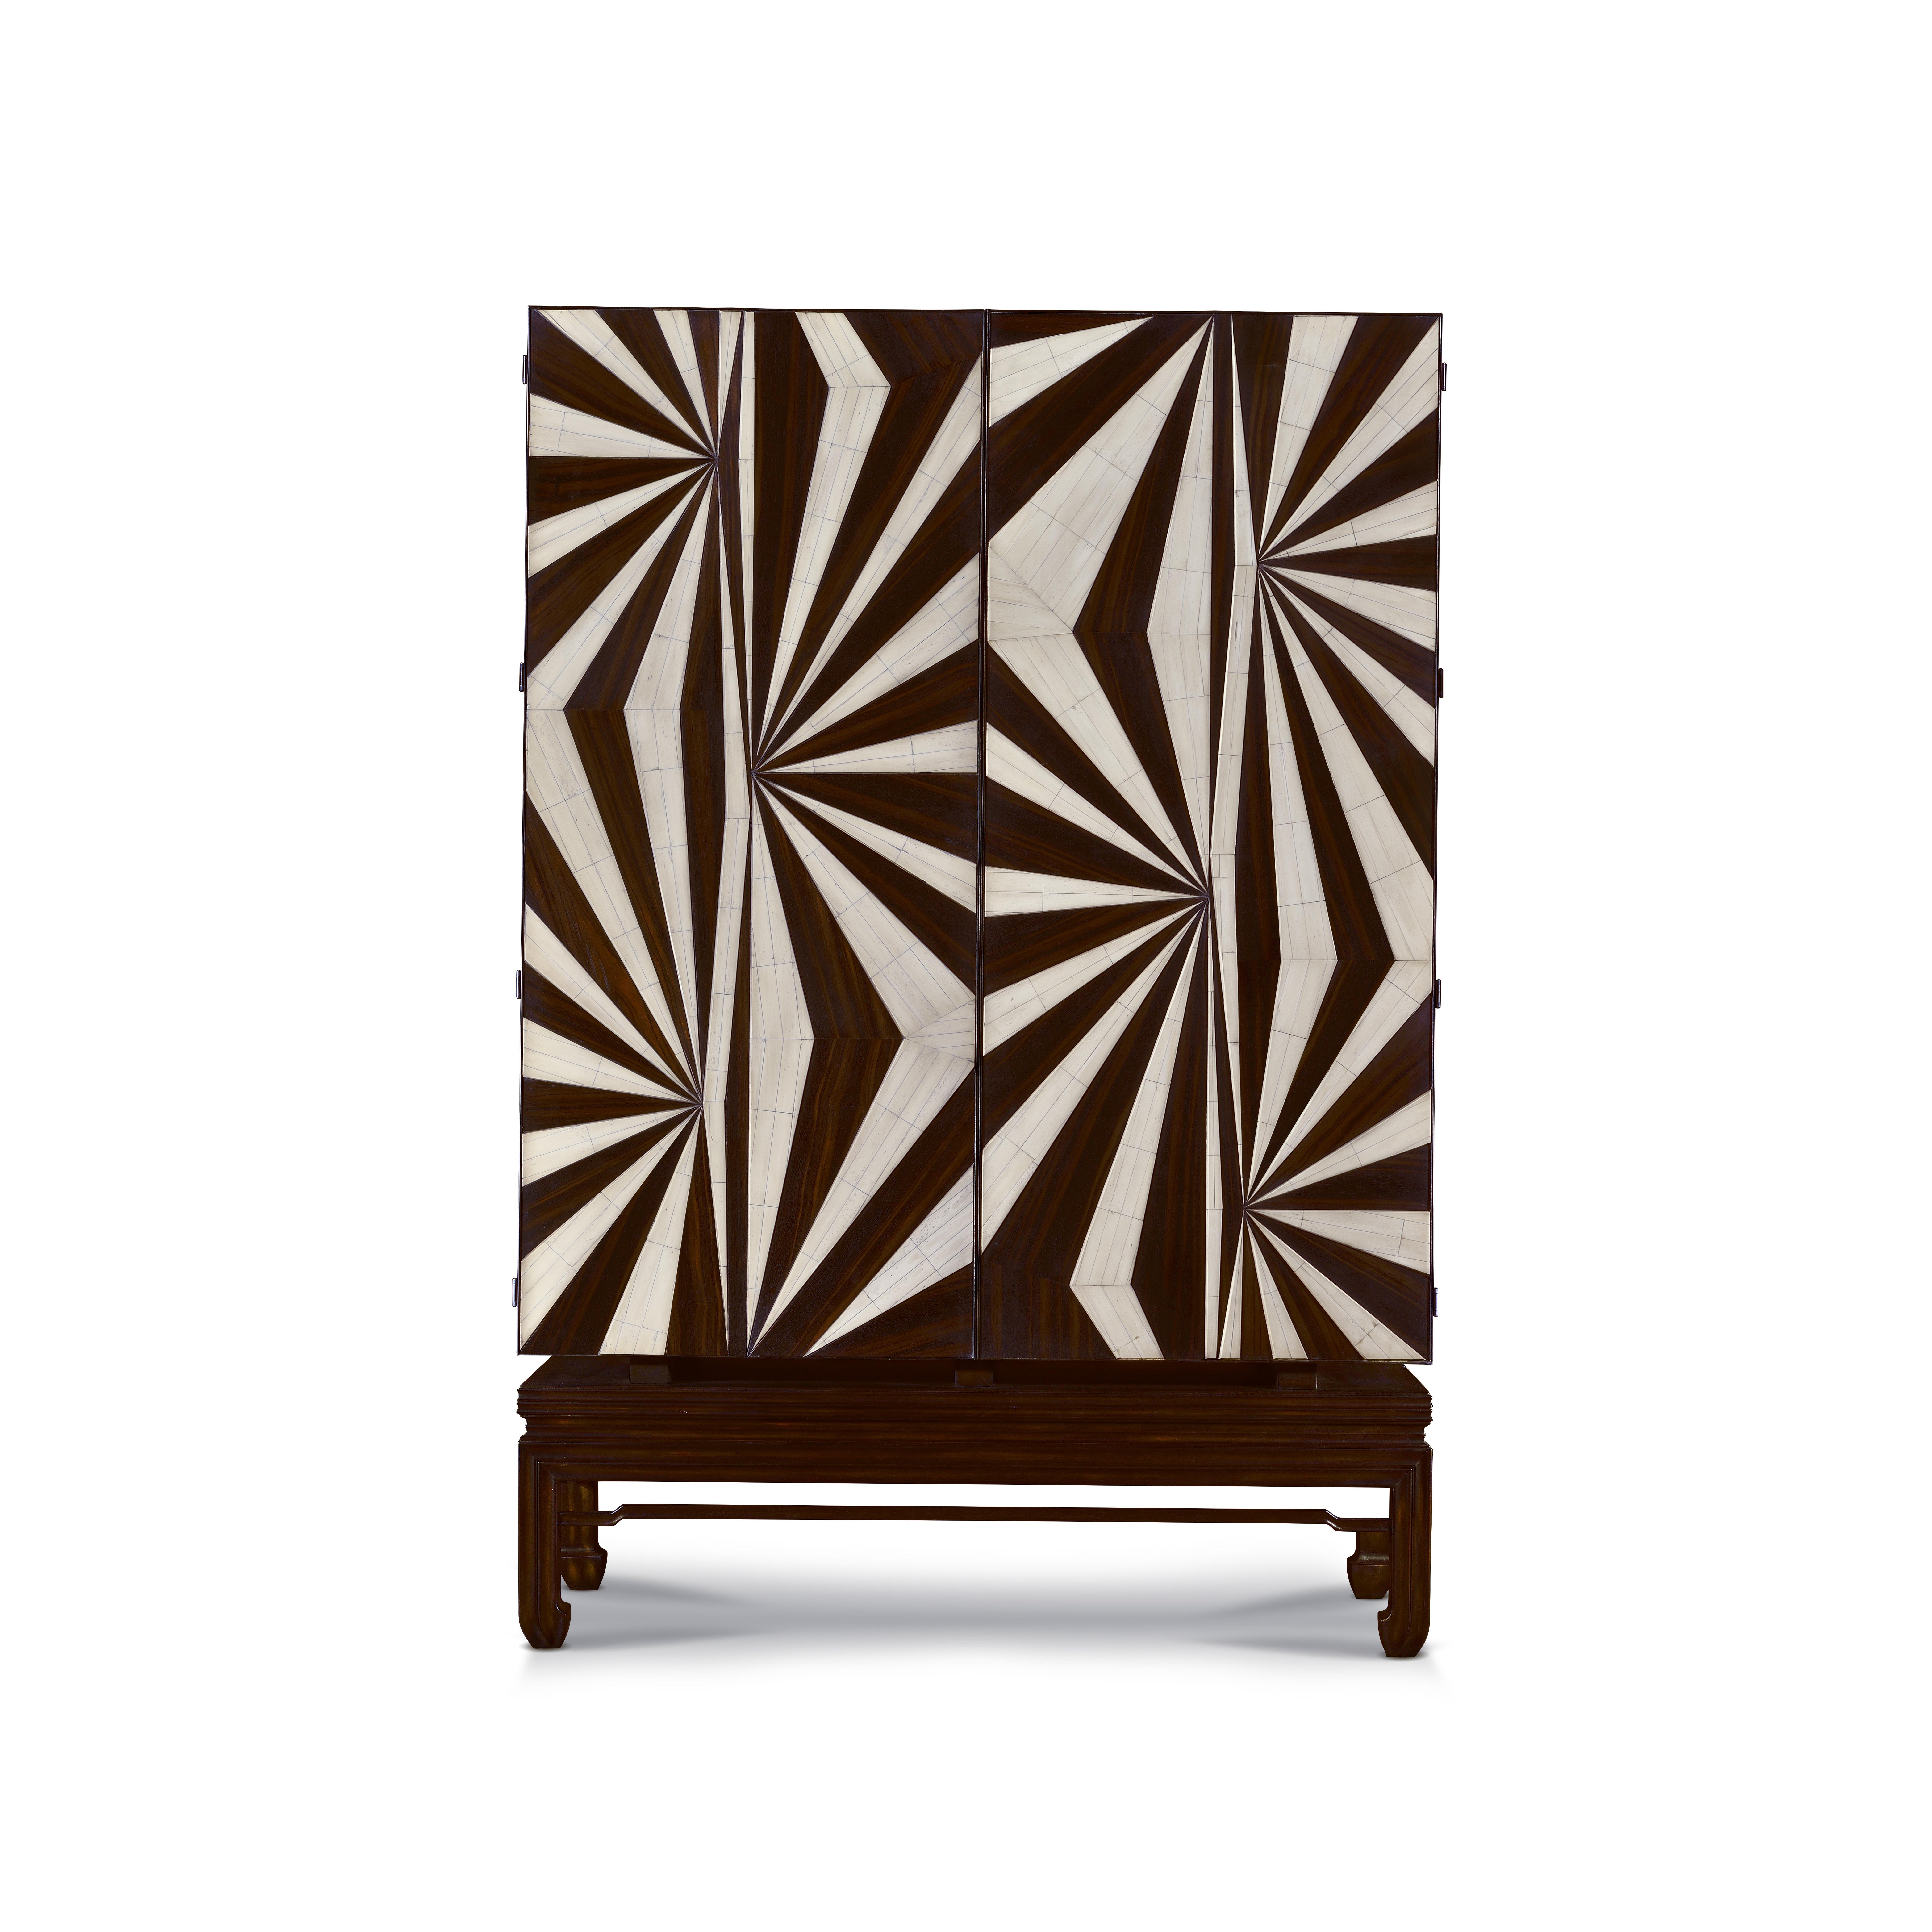 This armoire is a magnificent bar cabinet. Ebony veneer and intricate bone inlays, will be the centerpiece in an eclectic and sophisticated interior. The cabinet radiates elegance with its mesmerizing combination of hues and elaborate patterns,